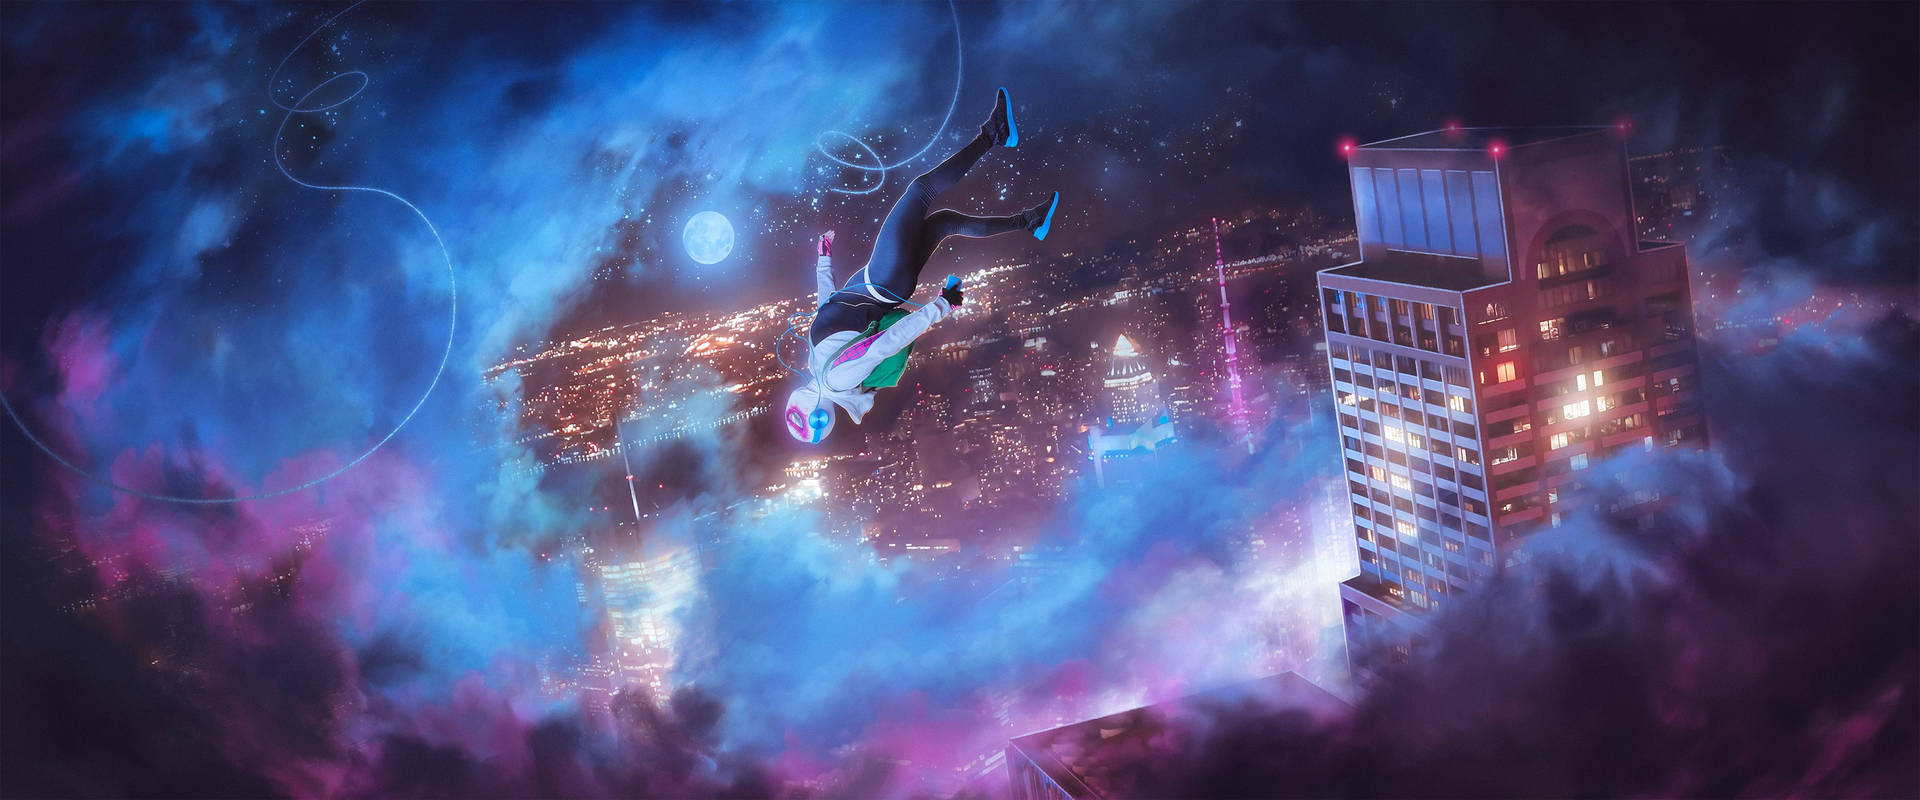 "Swinging through the Spider-Verse with style" Wallpaper